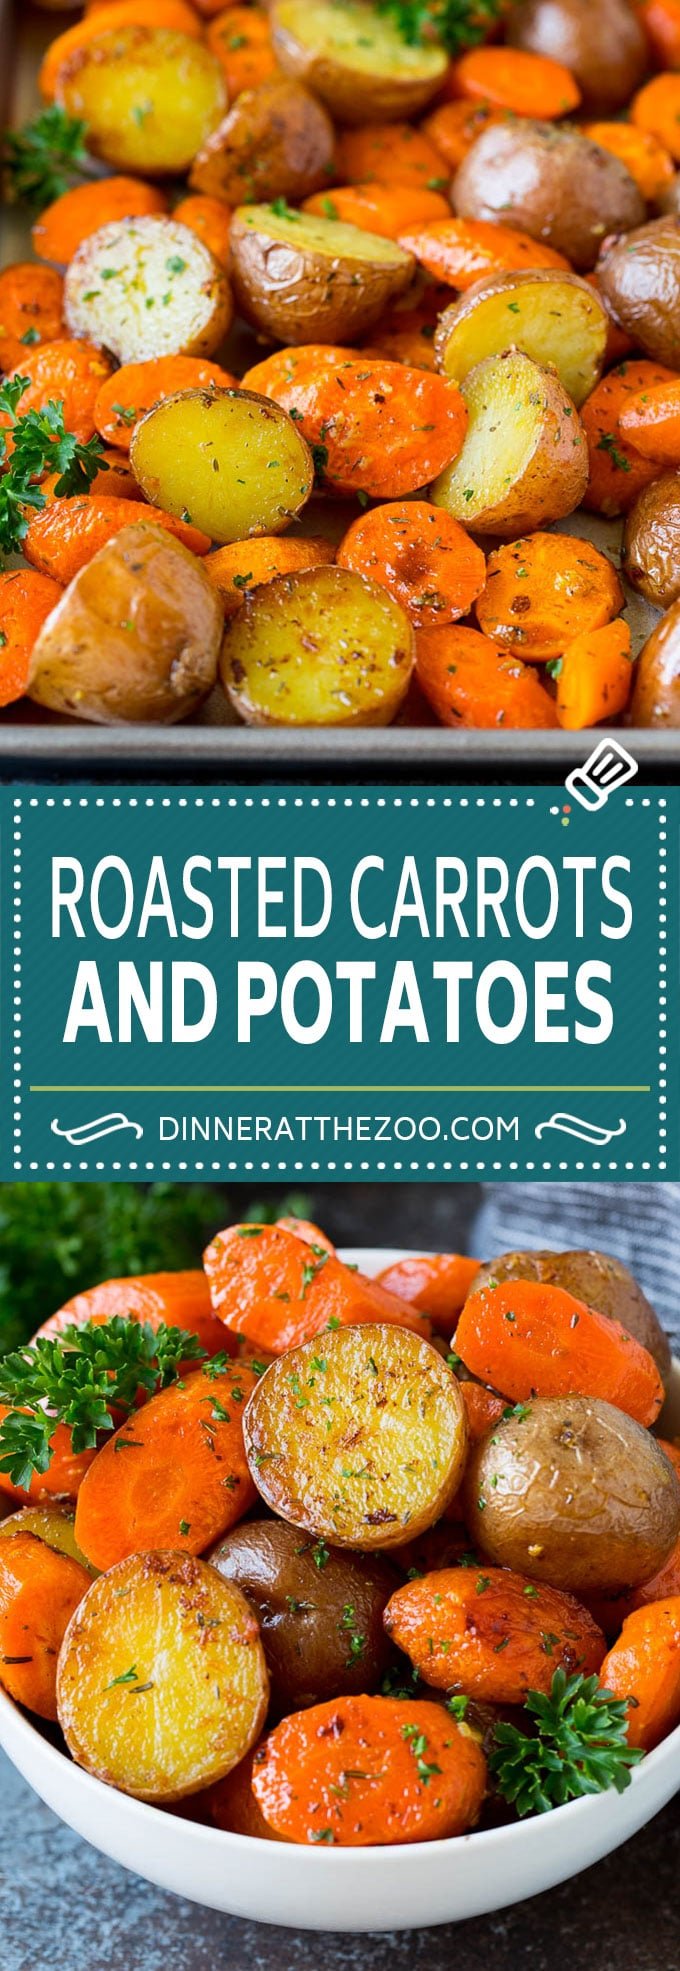 These roasted potatoes and carrots are coated in butter, garlic and herbs, then cooked until golden brown and tender.